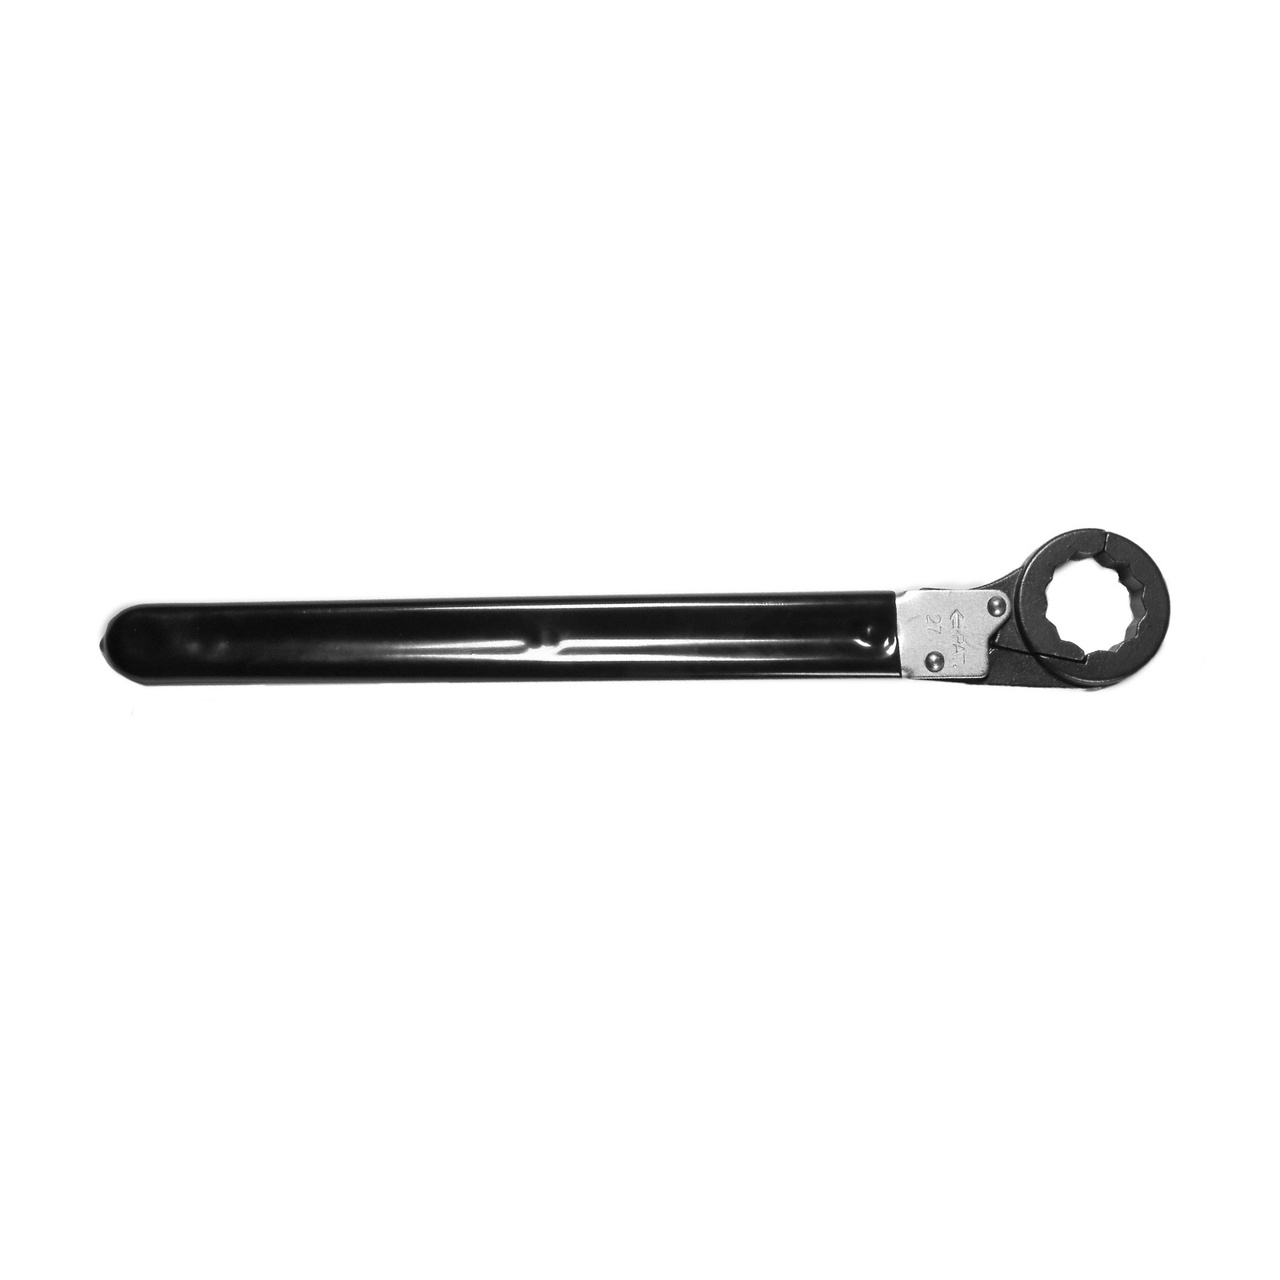 Open Ratchet Wrench 24 mm